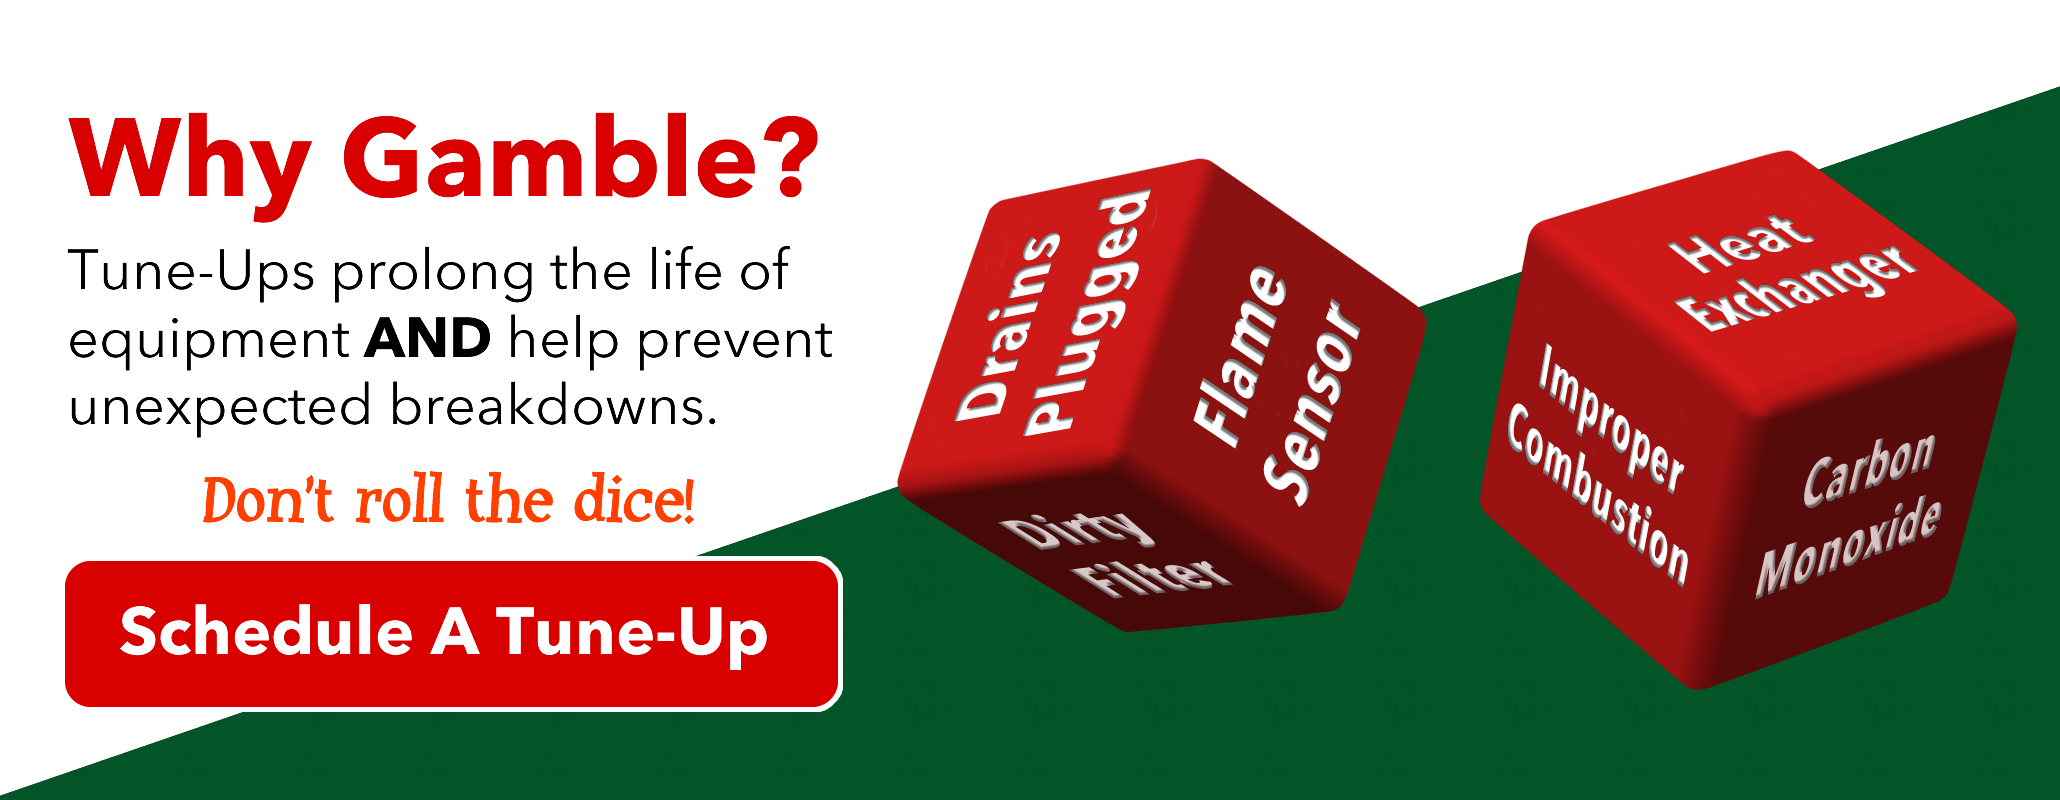 Why Gamble? Tune-ups prolong the life of equipment AND help prevent unexpected breakdowns. Don't roll the dice! Schedule a tune-up (Click to Schedule)